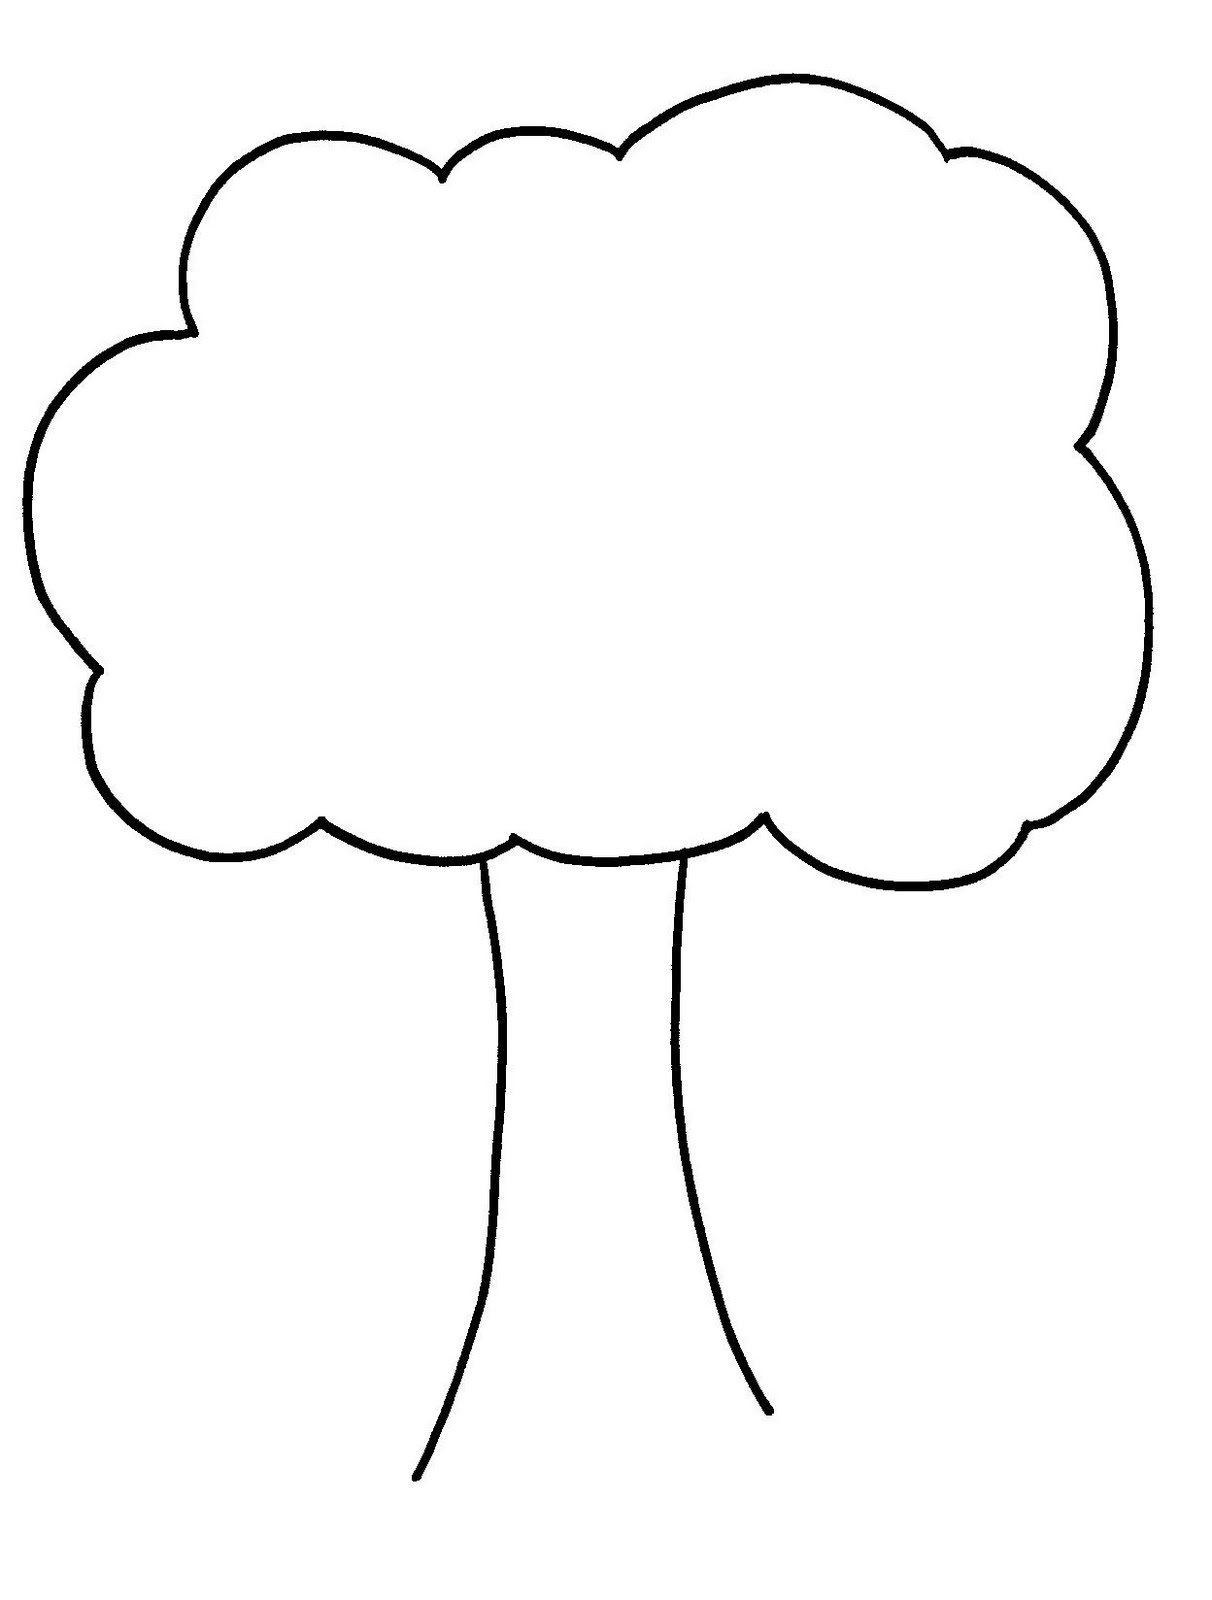 Free Tree Outline, Download Free Tree Outline png images, Free ClipArts